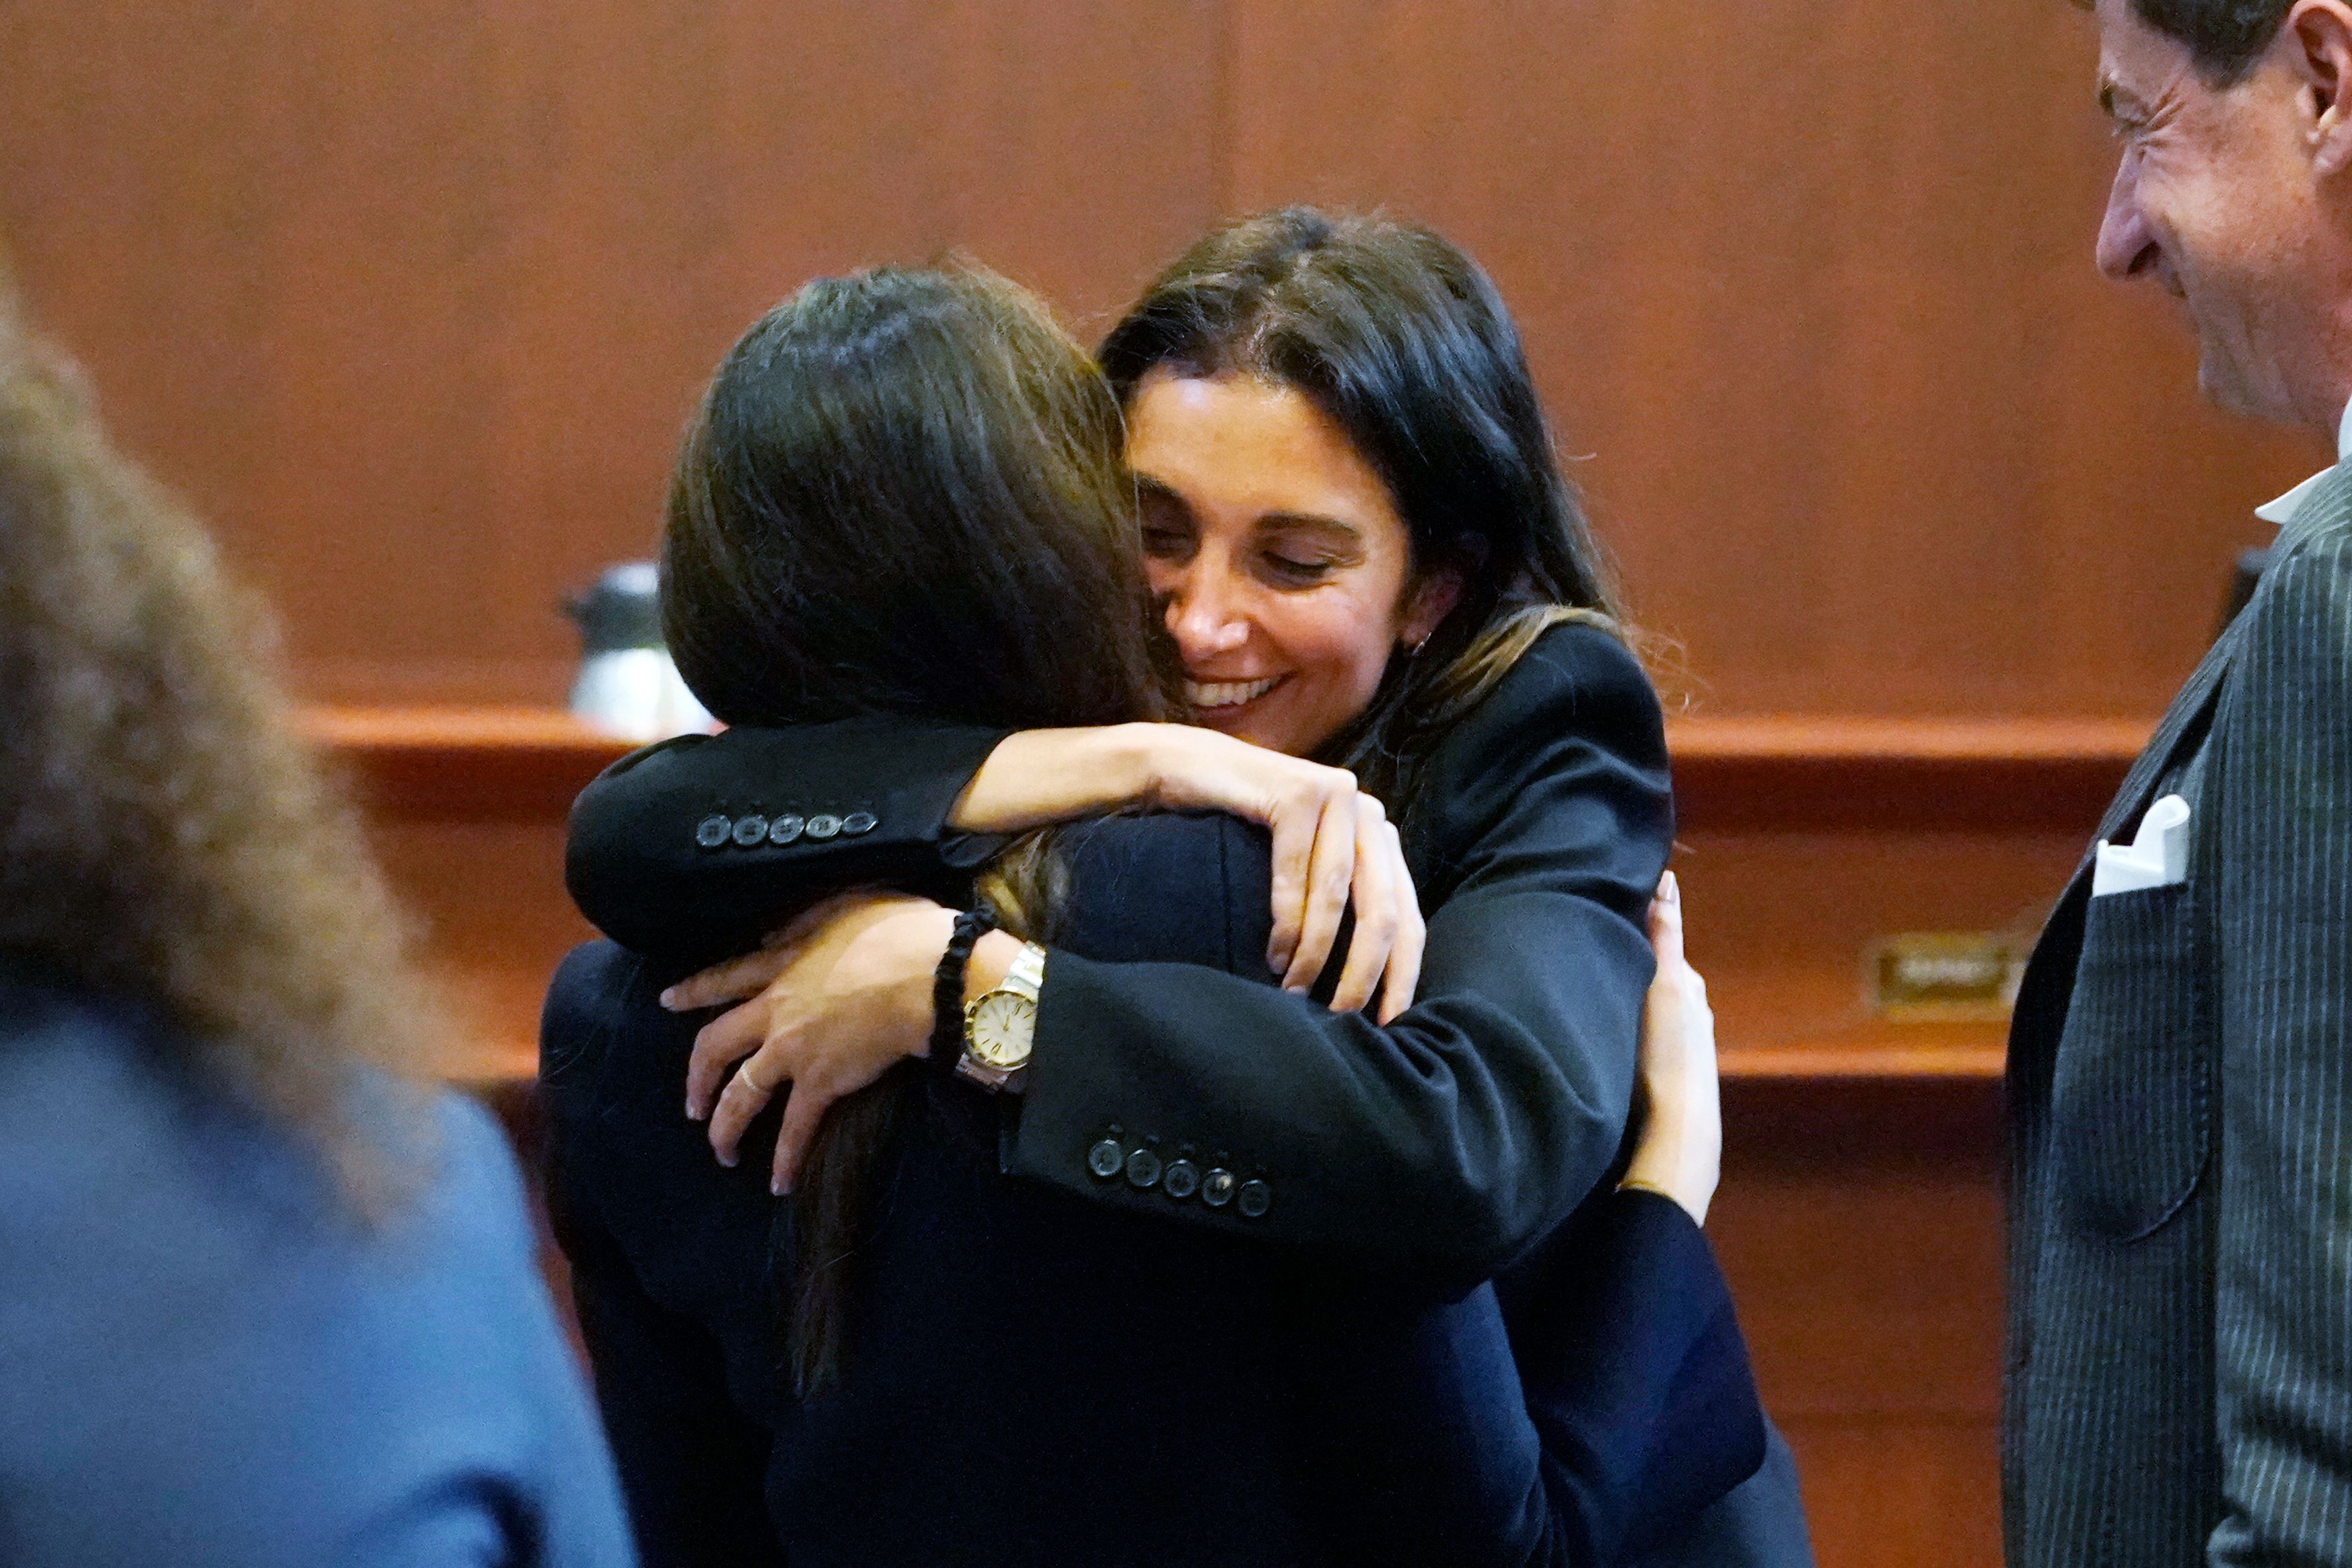 Lawyer Joelle Rich hugs attorney Camille Vasquez at the Fairfax County Circuit Courthouse on May 16, 2022, in Fairfax, Virginia. | Source: Getty Images